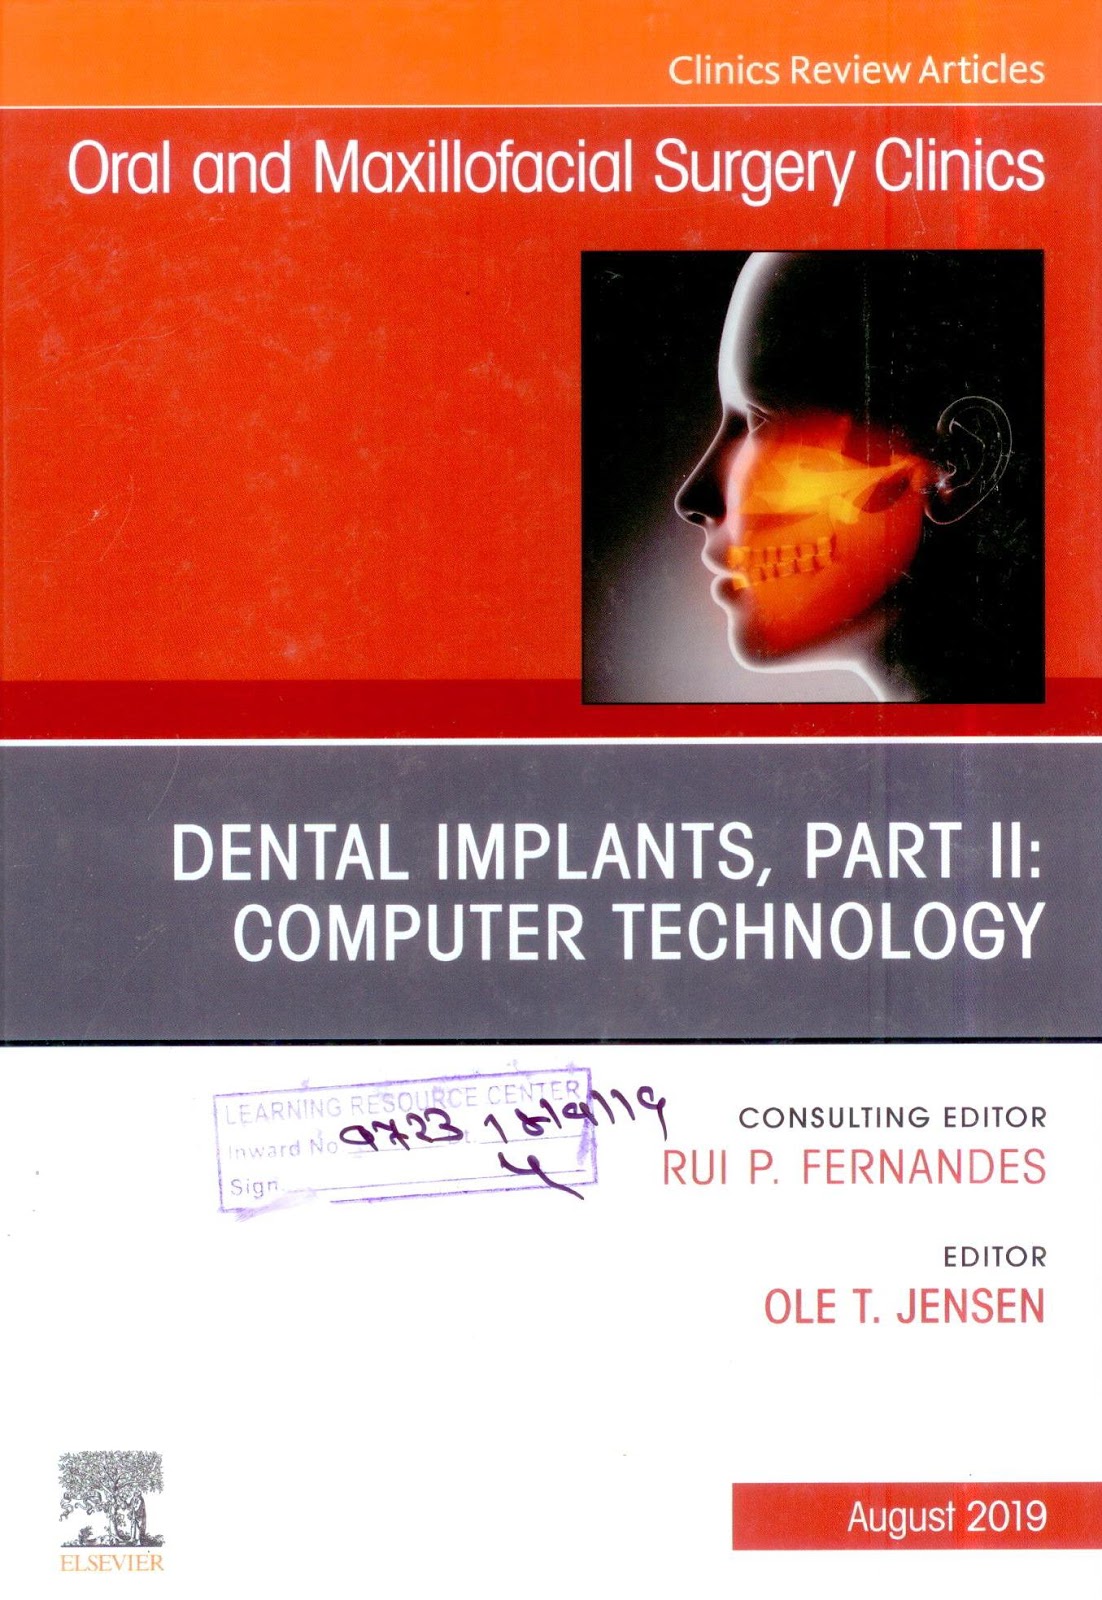 https://www.sciencedirect.com/journal/oral-and-maxillofacial-surgery-clinics-of-north-america/vol/31/issue/3